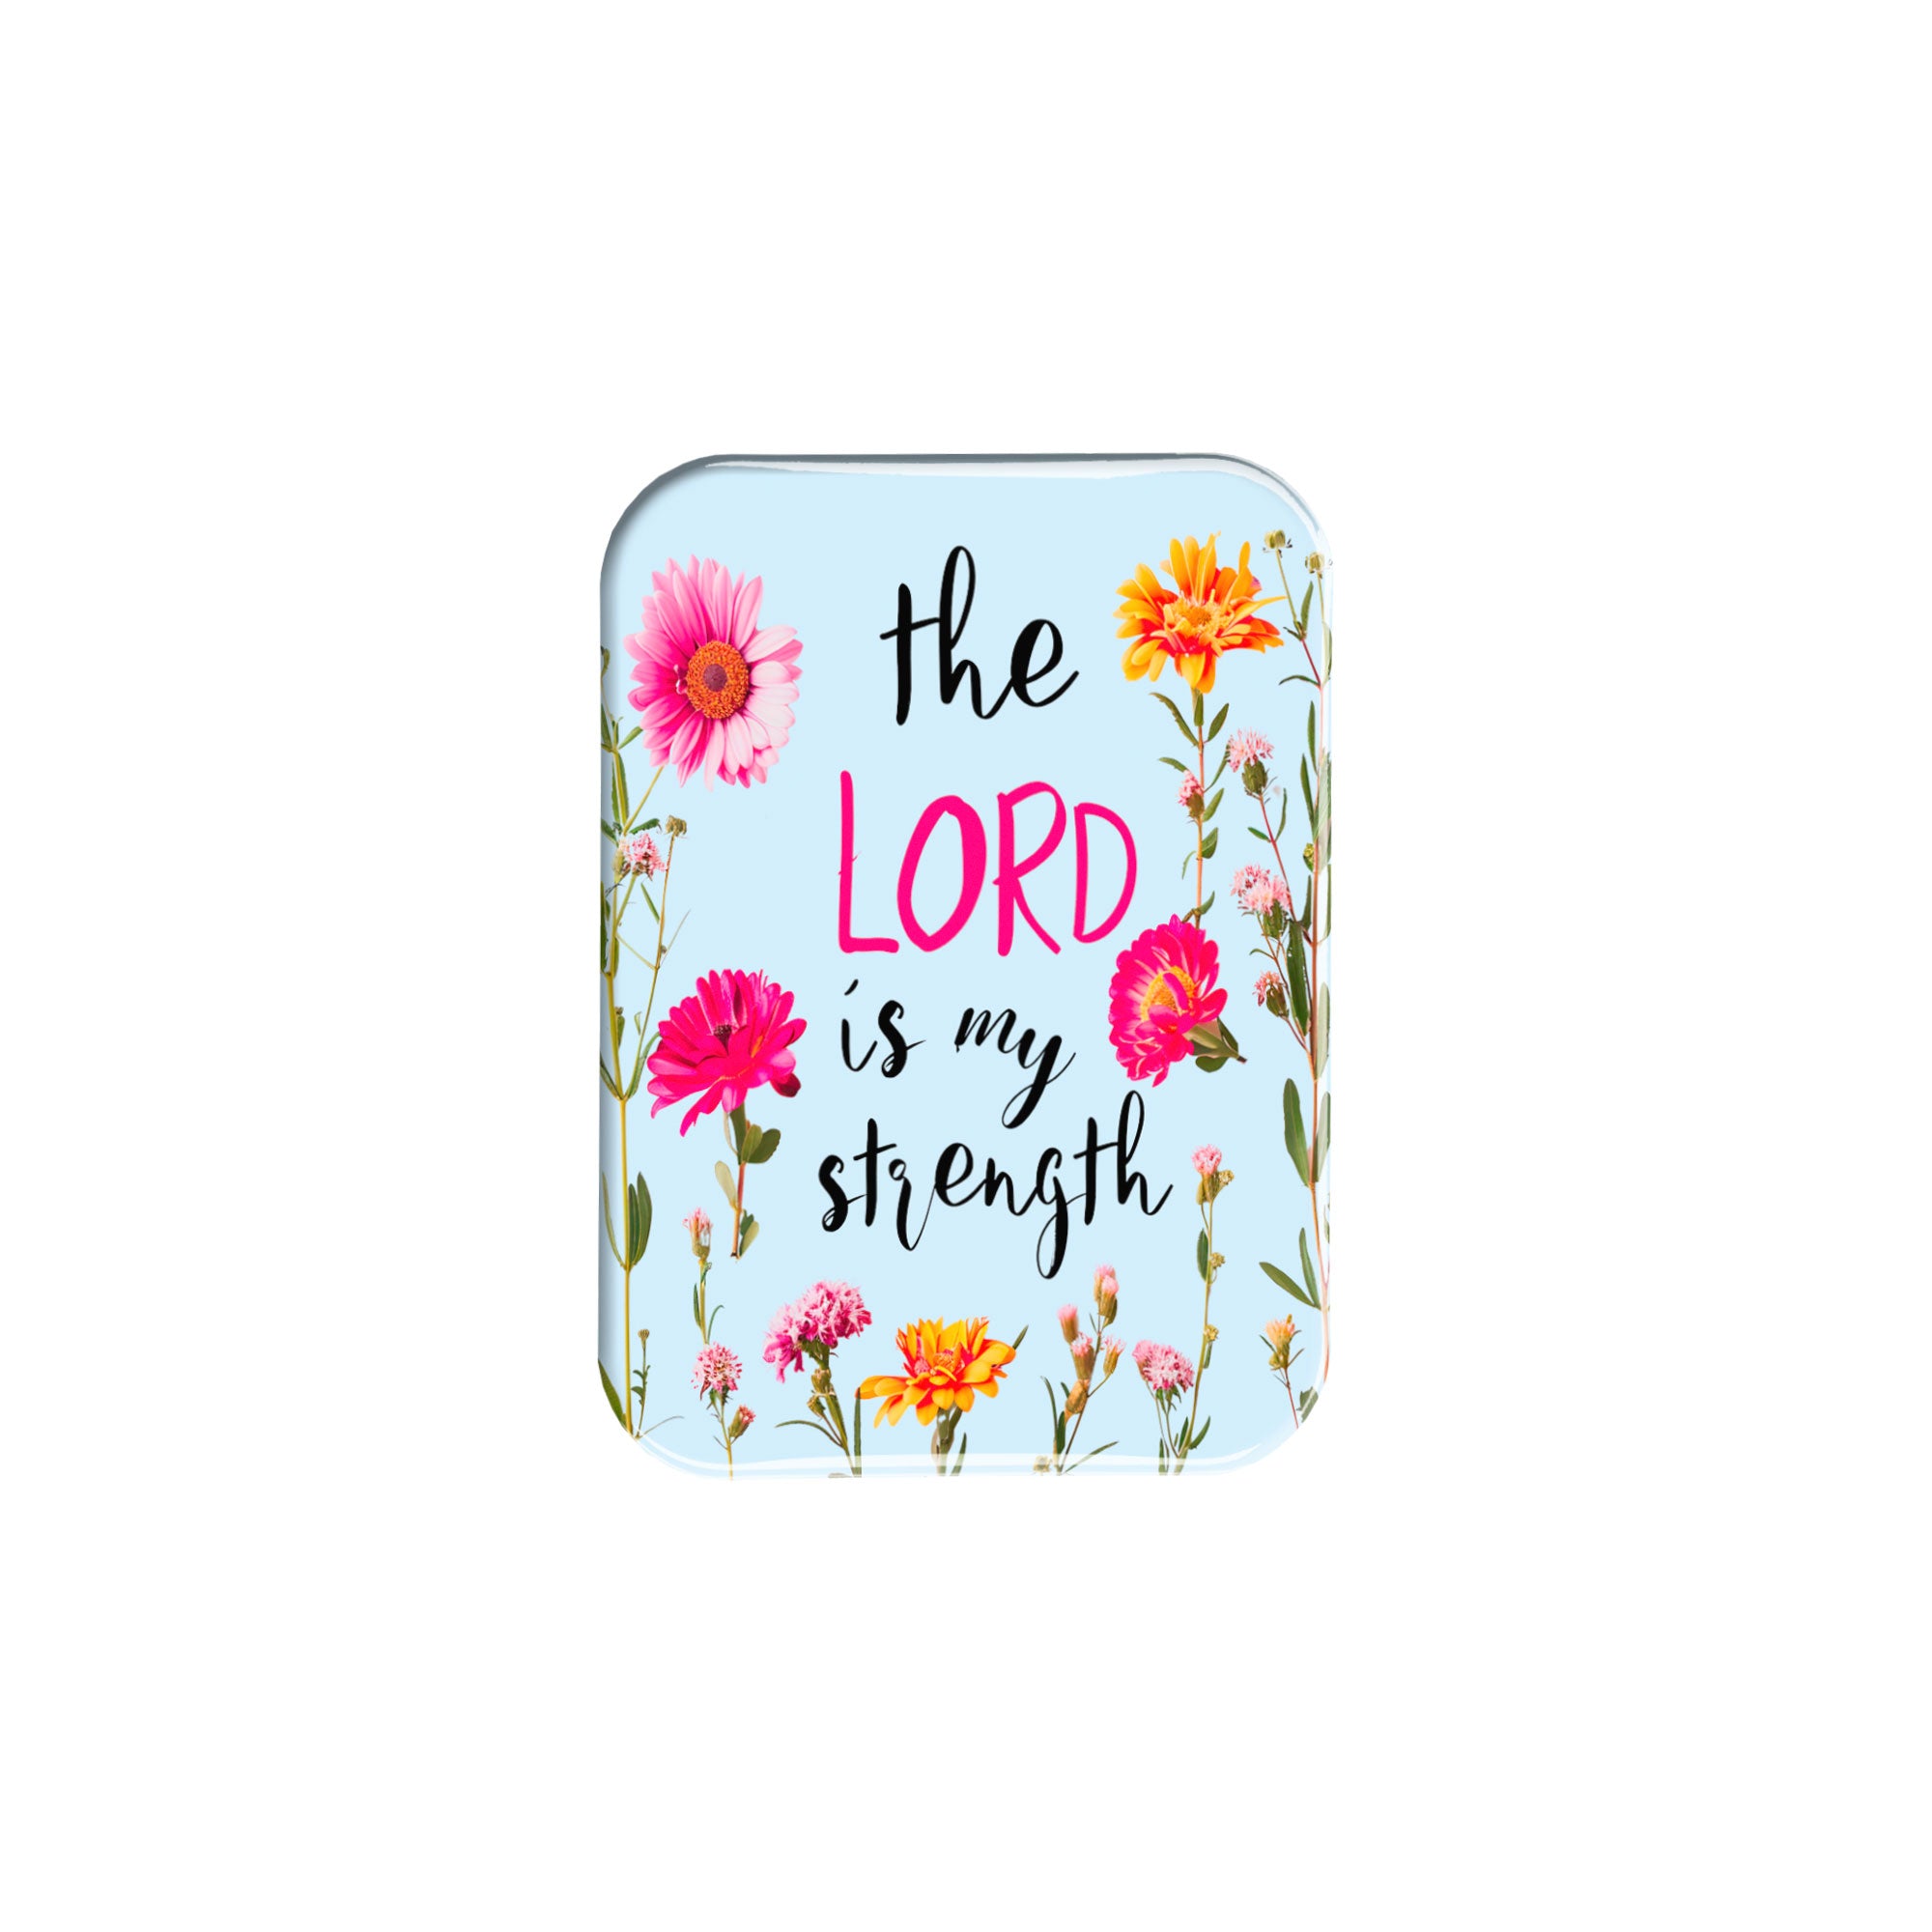 "The Lord is my Strength" - 2.5" X 3.5" Rectangle Fridge Magnets